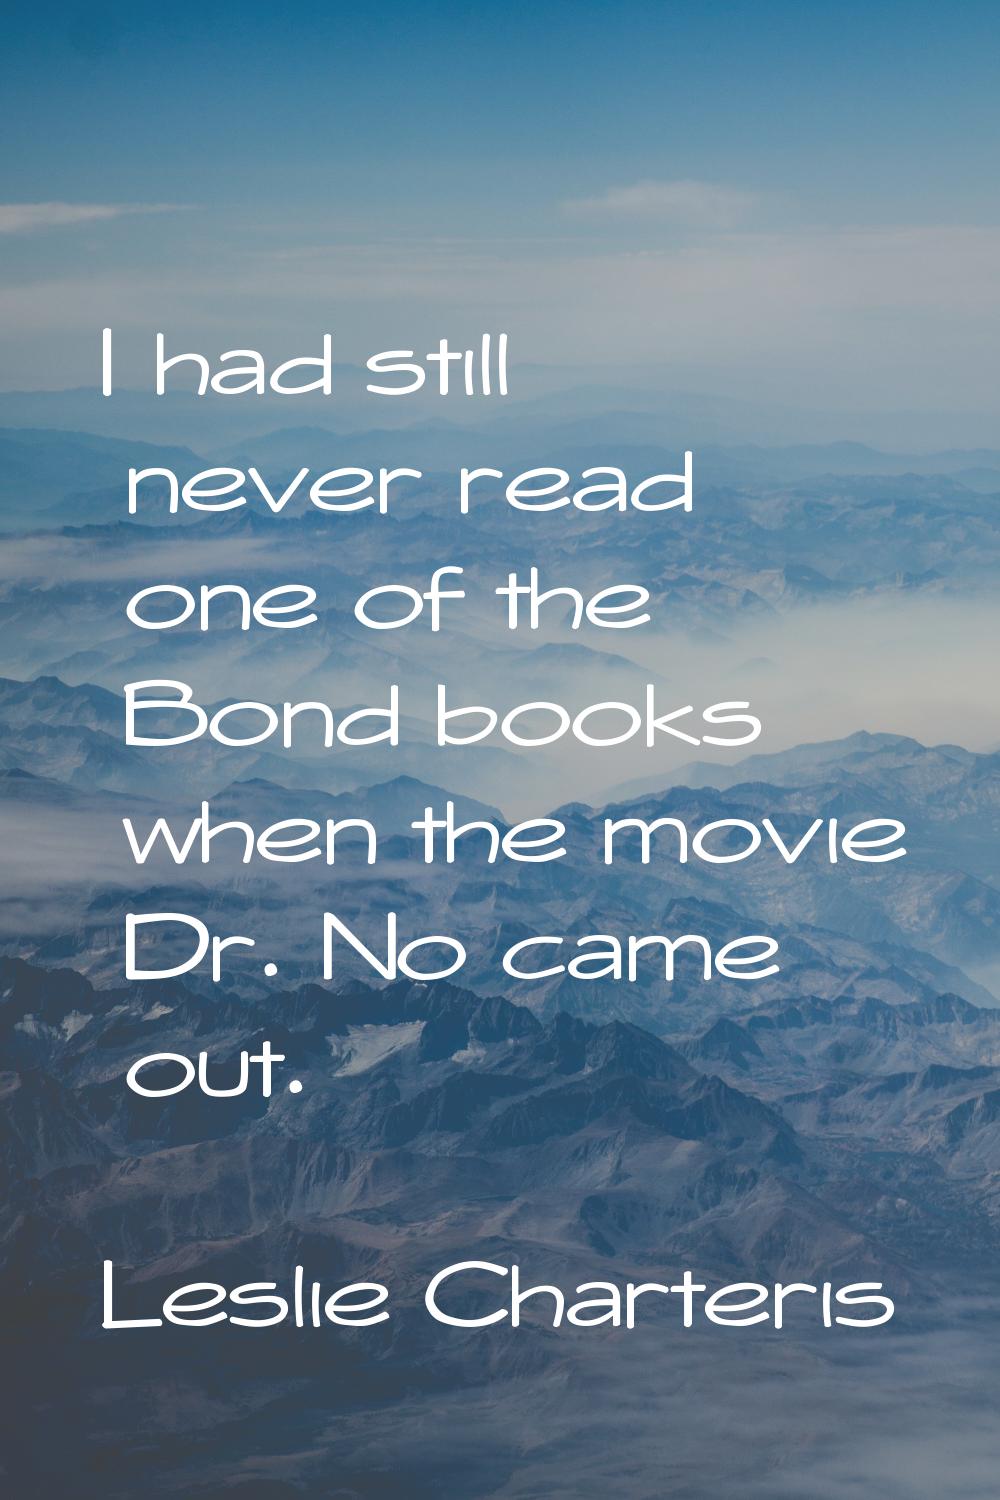 I had still never read one of the Bond books when the movie Dr. No came out.